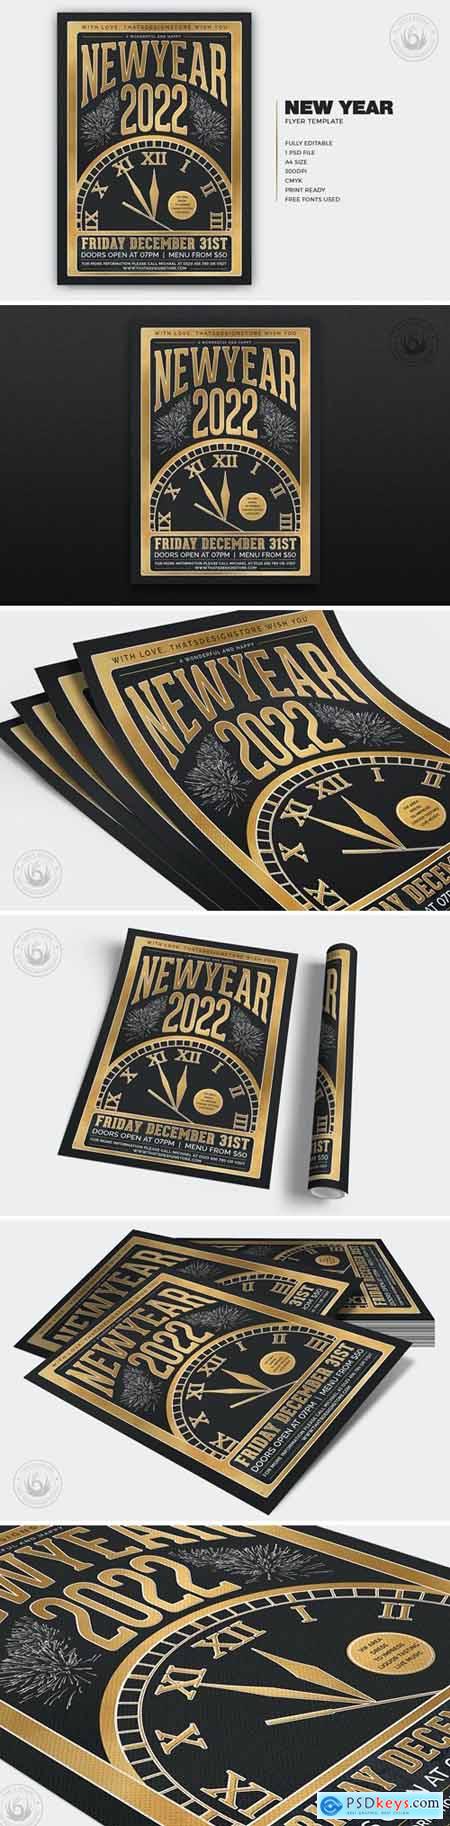 New Year Flyer Template V12